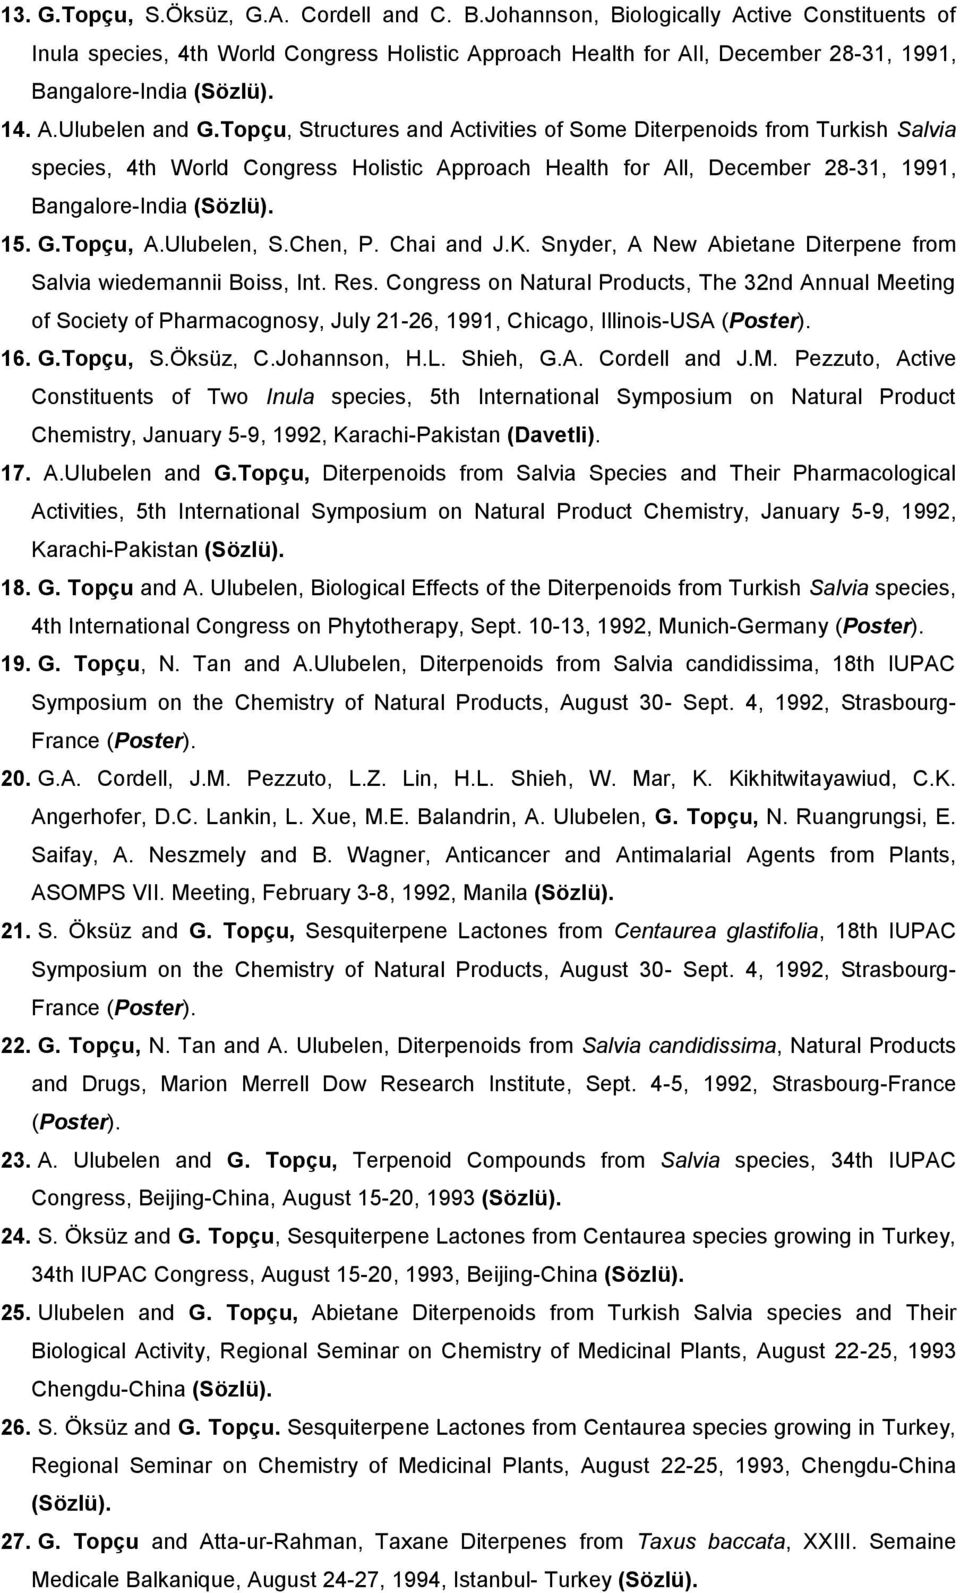 Topçu, Structures and Activities of Some Diterpenoids from Turkish Salvia species, 4th World Congress Holistic Approach Health for All, December 28-31, 1991, Bangalore-India (Sözlü). 15. G.Topçu, A.